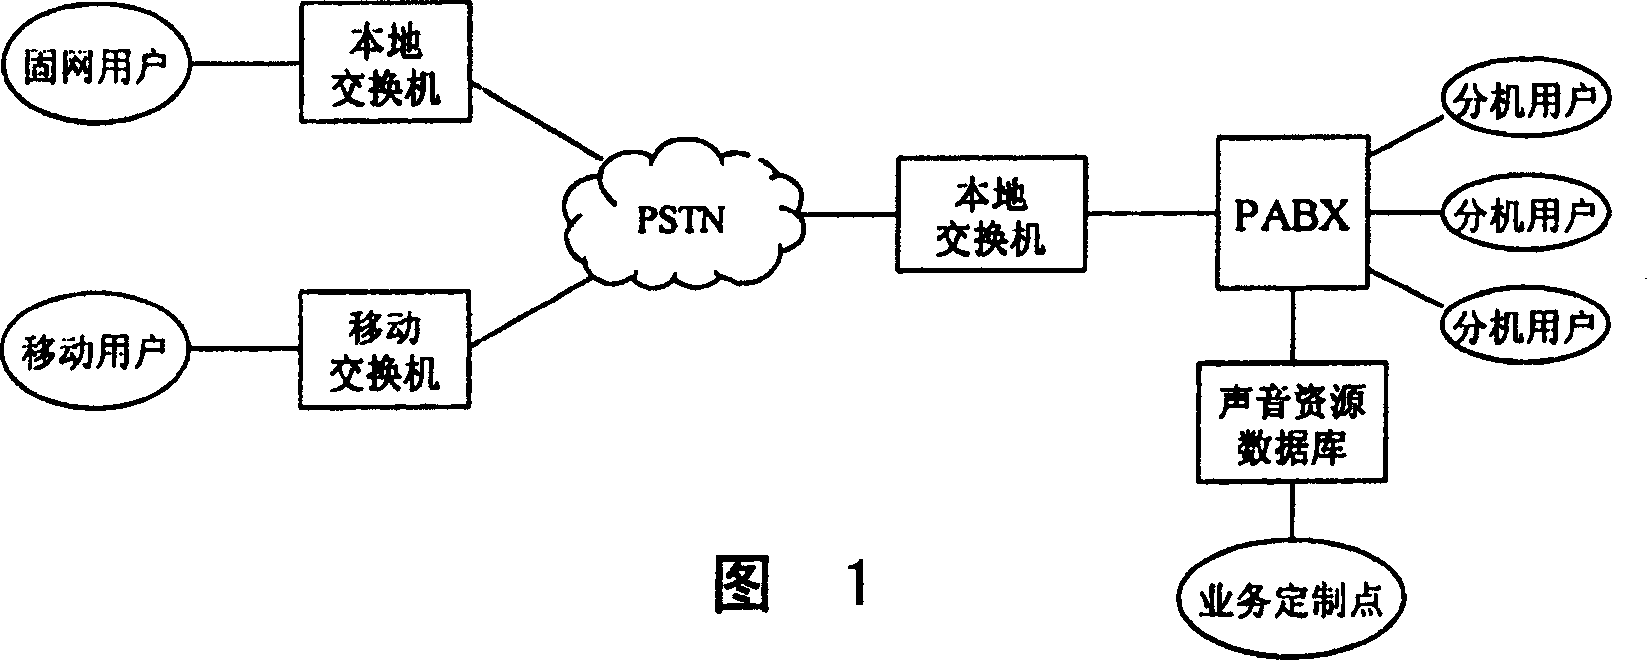 Method and system for improving ring back tone service to user small exchanger